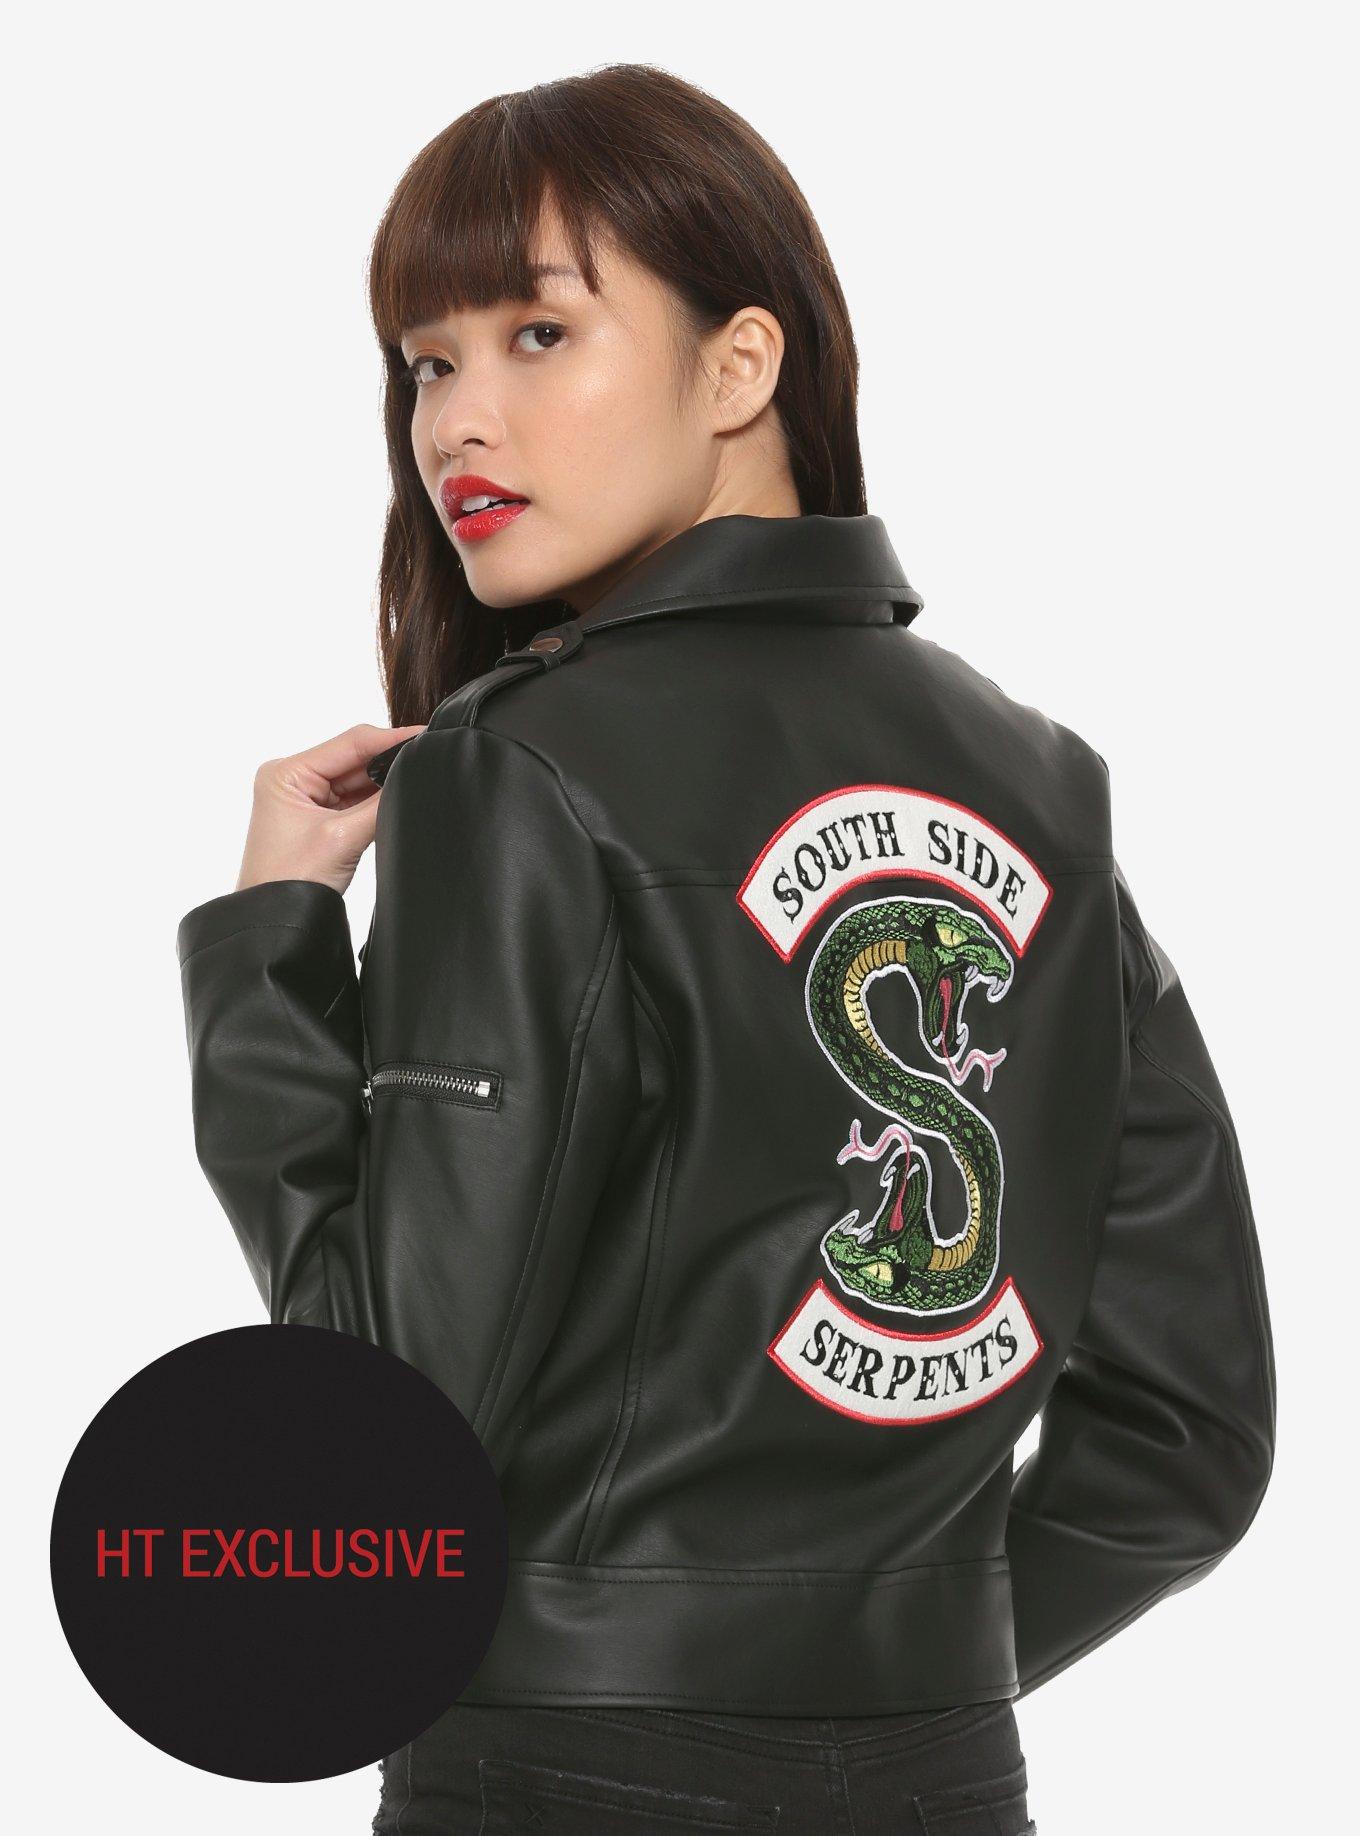 Riverdale Southside Serpents Faux Leather Girls Jacket Hot Topic Exclusive, BLACK, hi-res